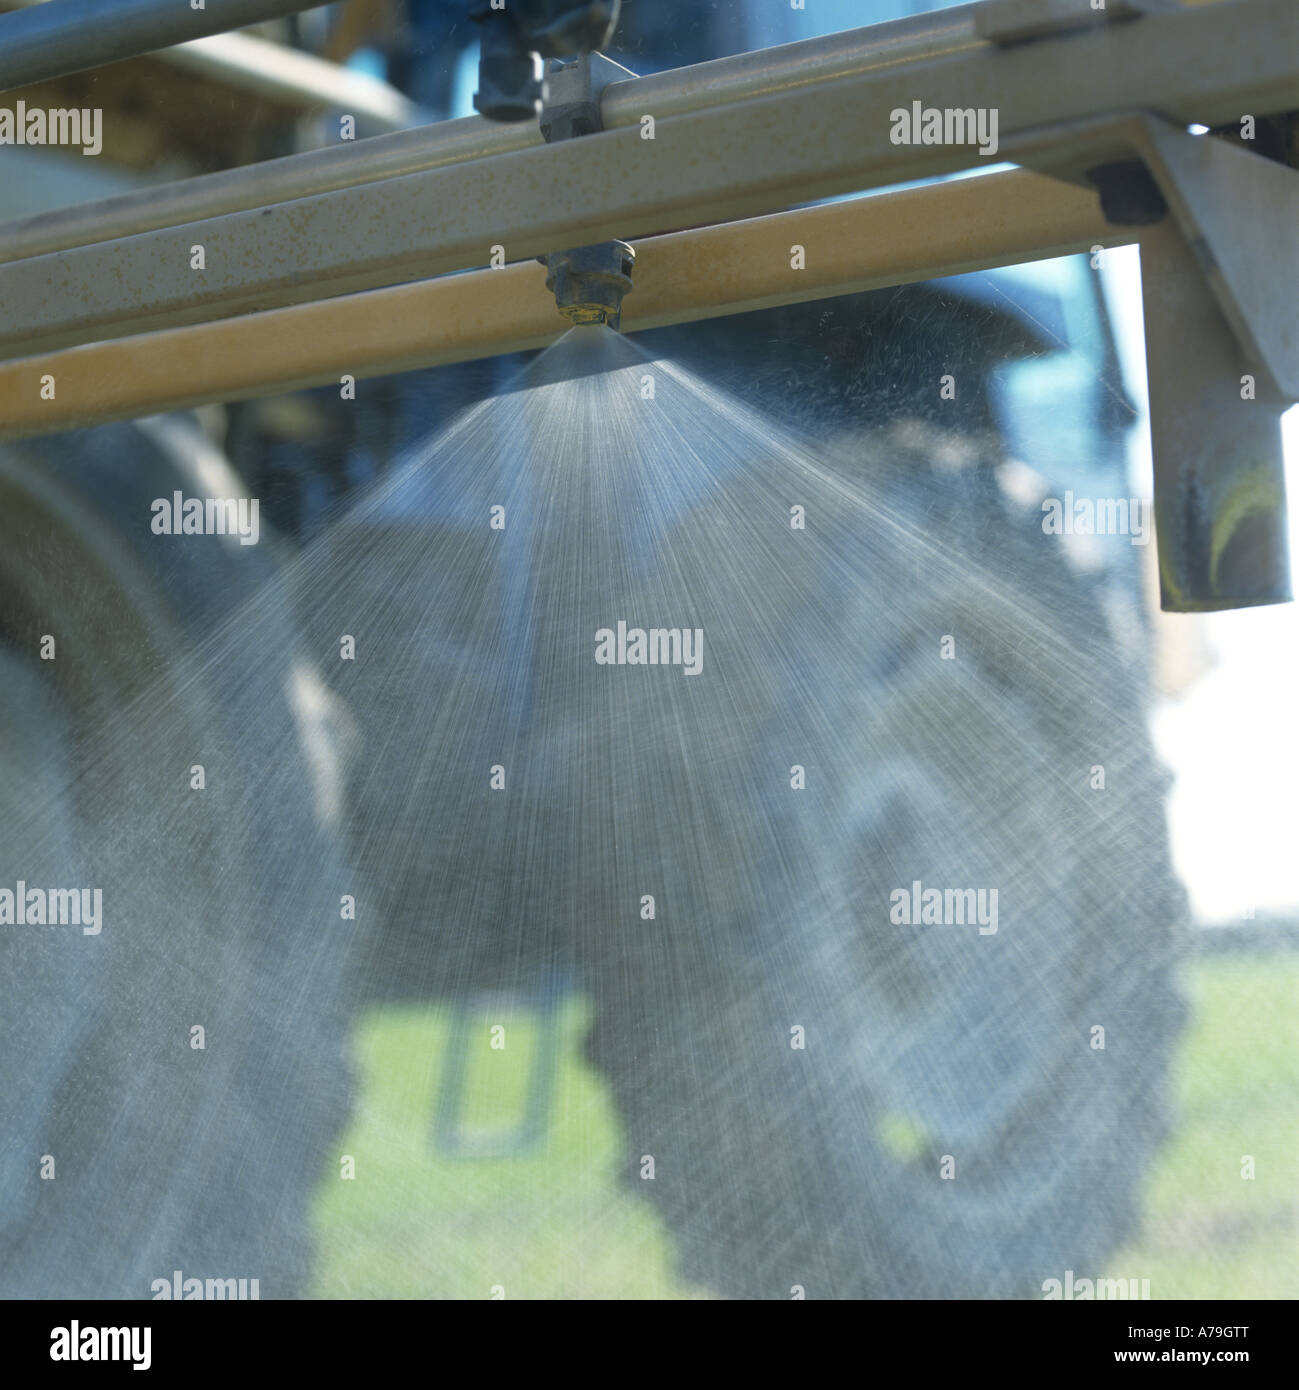 Spray fan pattern from the jet nozzle on a tractor sprayer boom Stock Photo